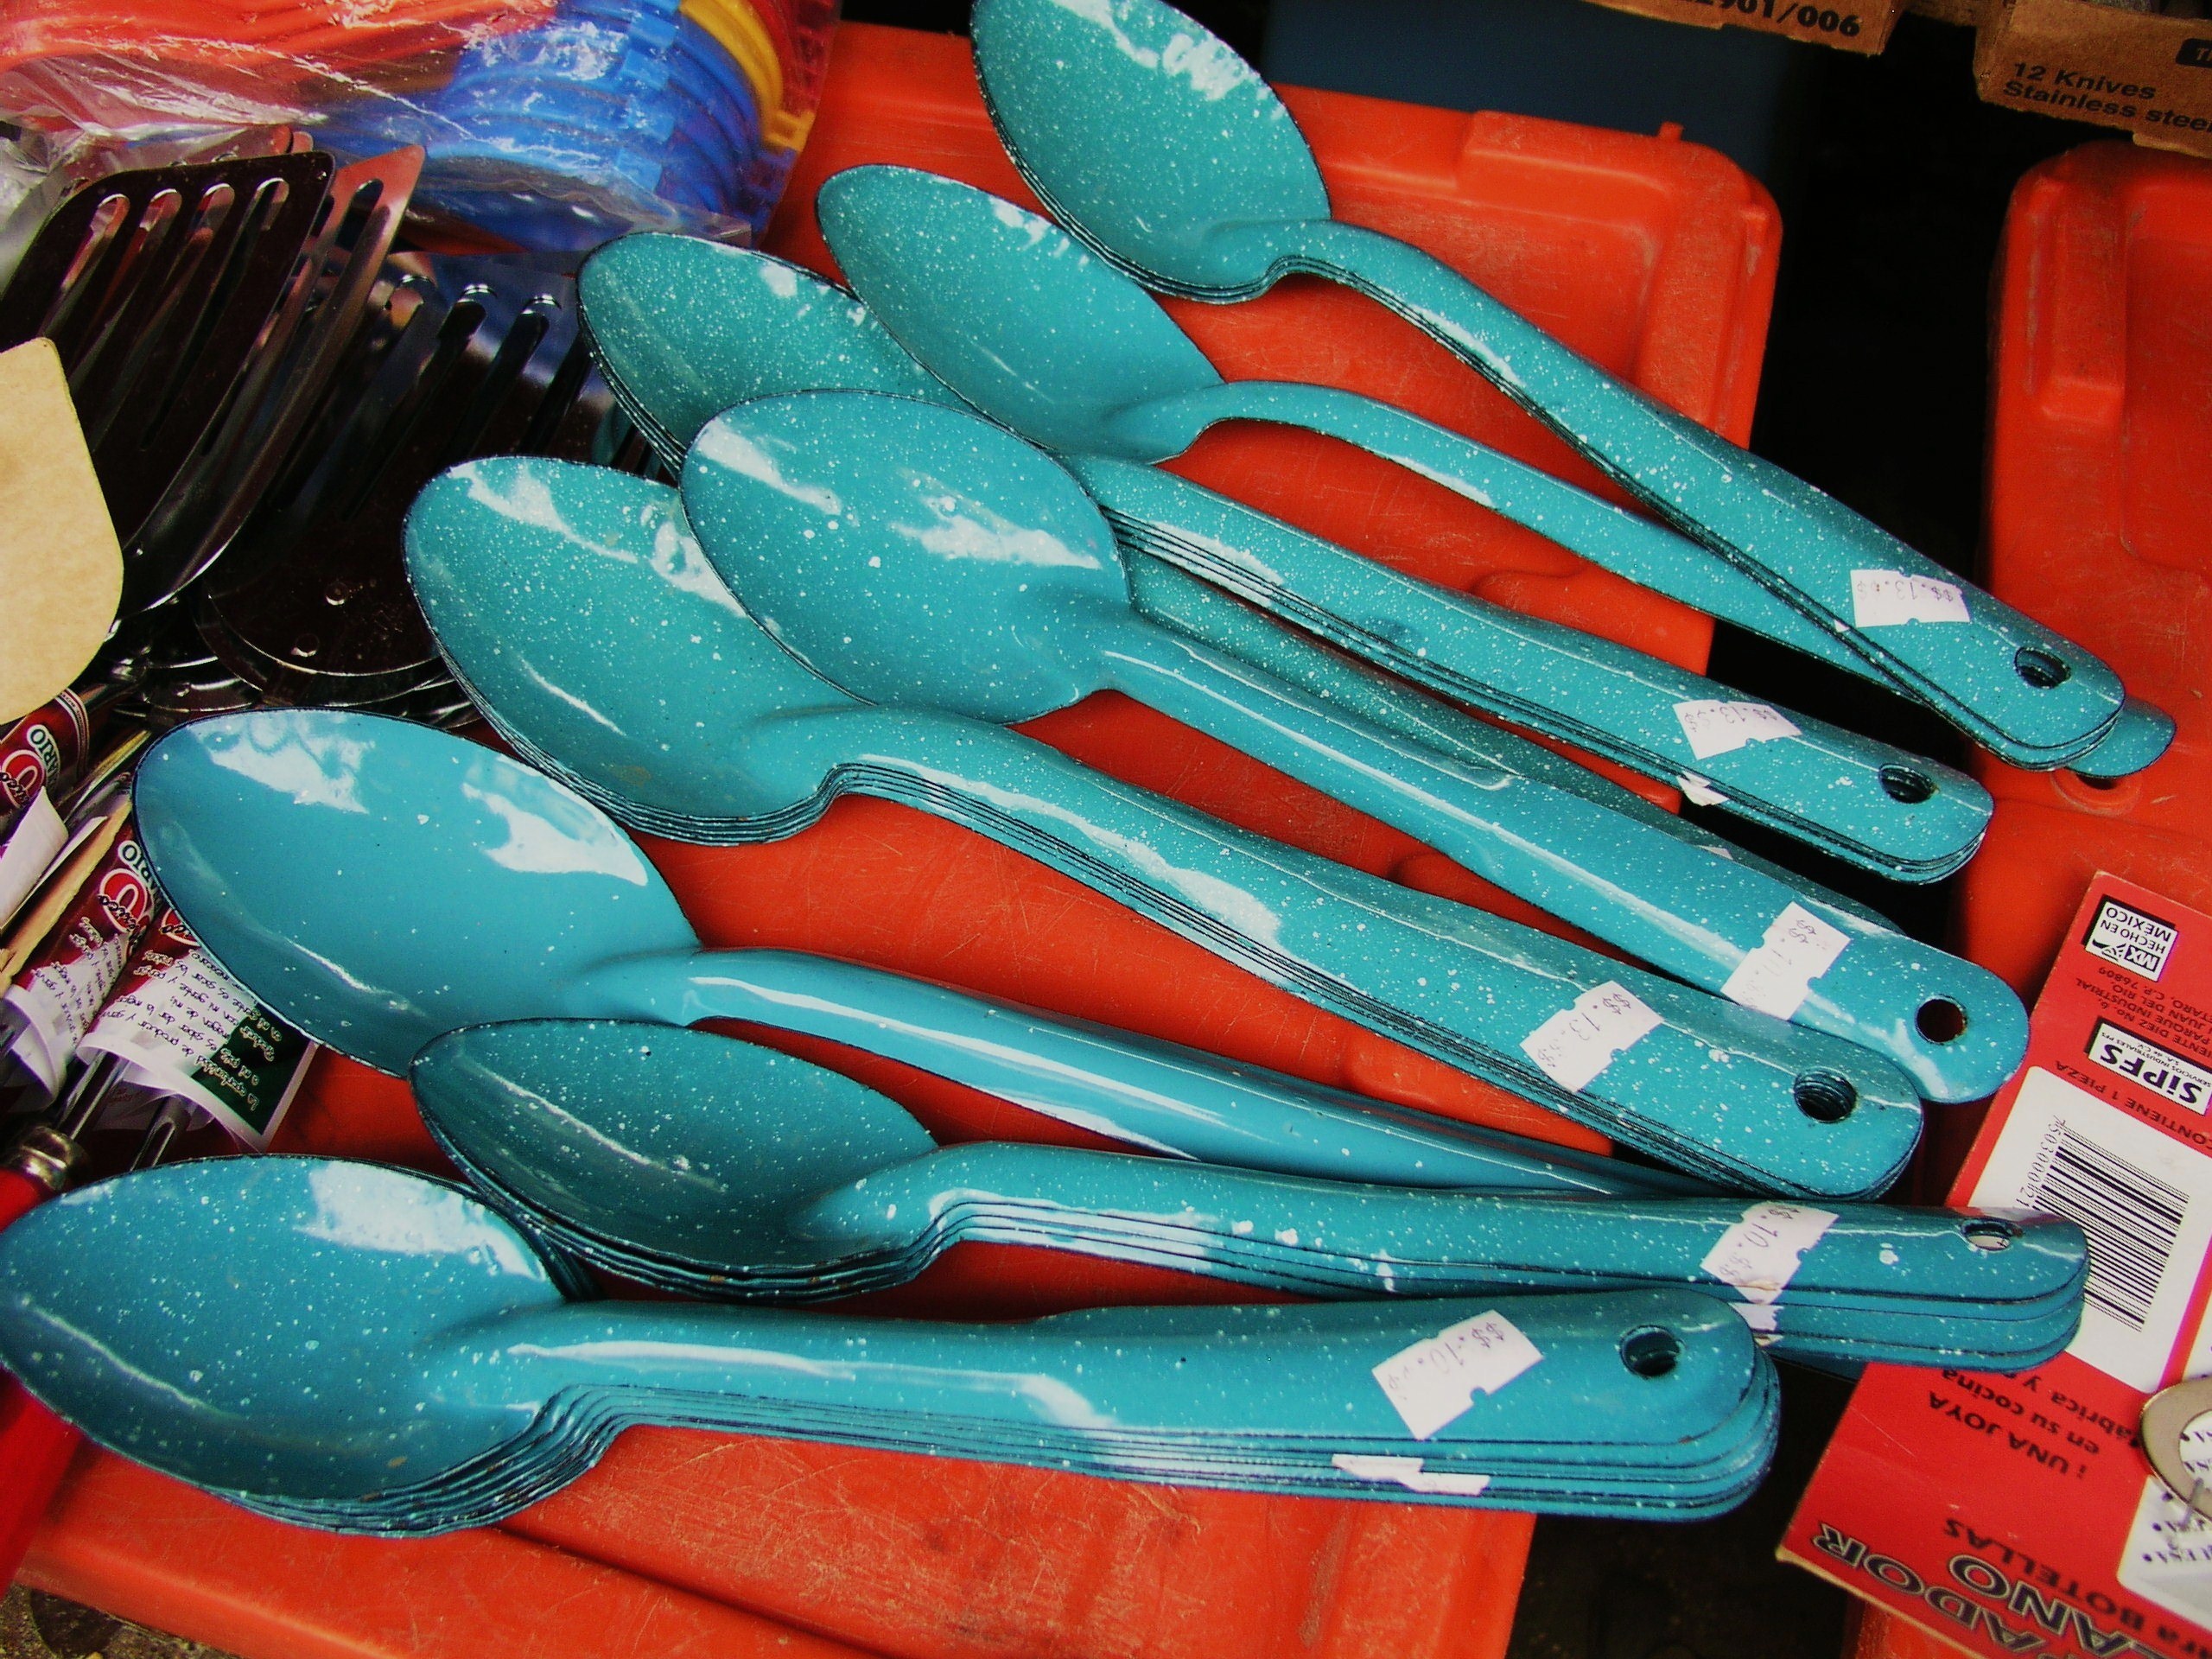 Mexican kitchen tools and gadgets at the La Cruz street market – Cooking in  Mexico